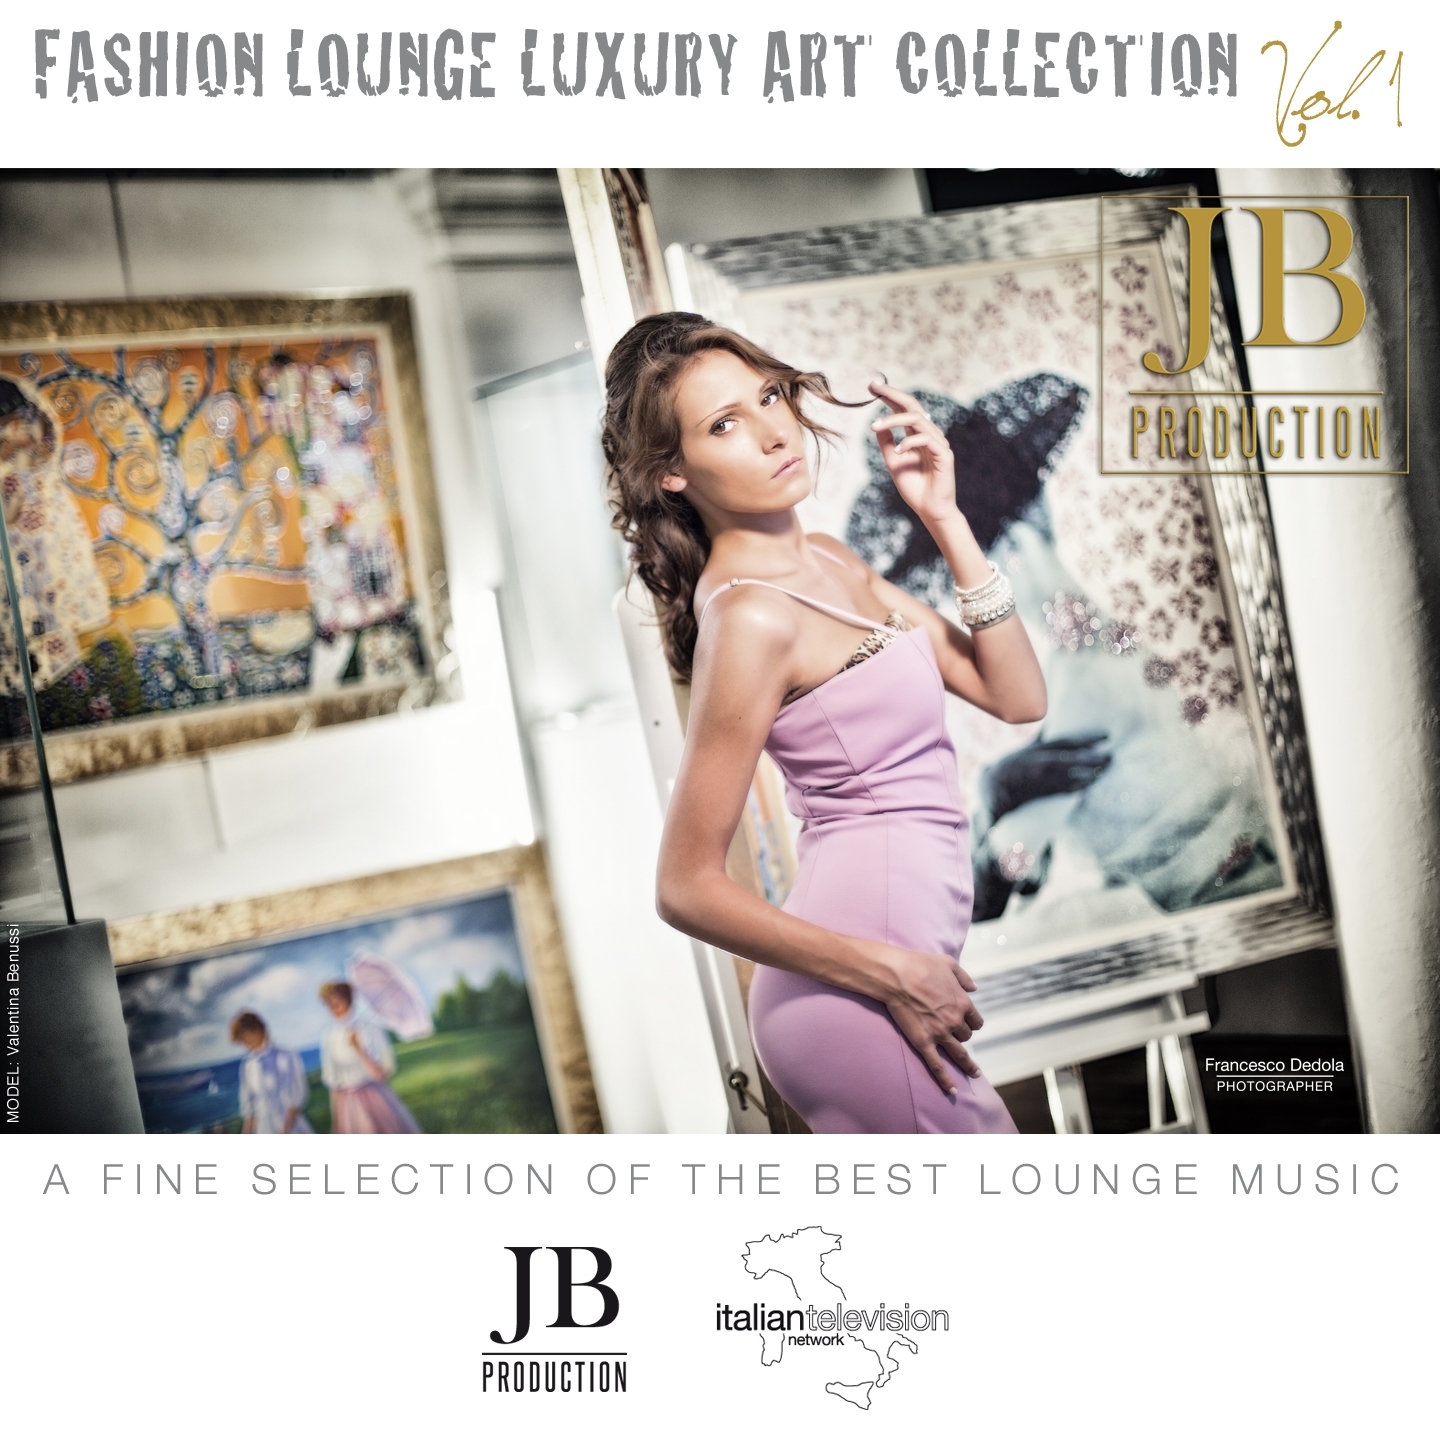 Fashion Lounge Luxury Art Collection, Vol.1 (A Fine Selection of the Best Lounge Music)